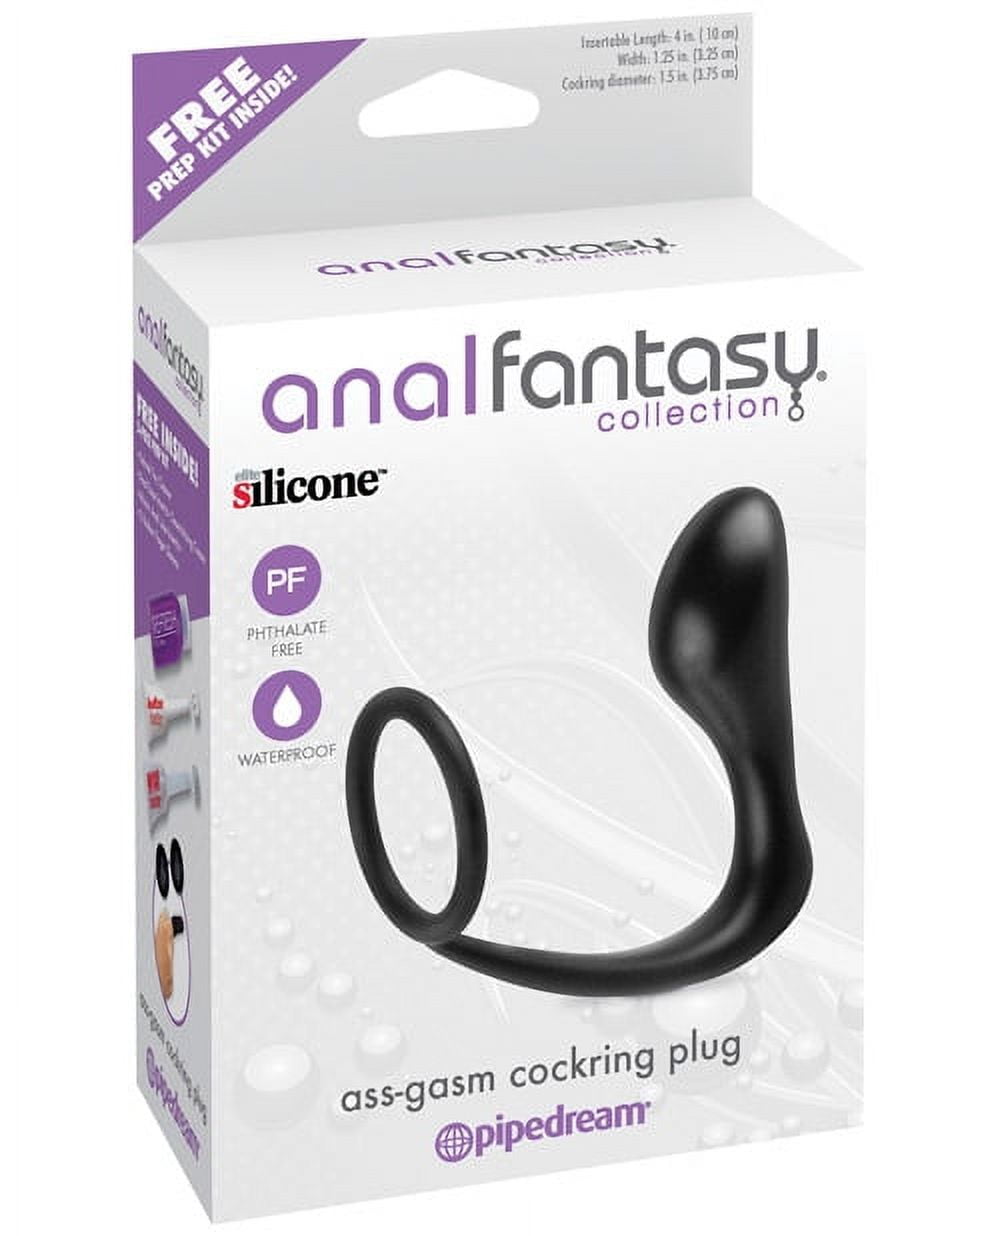 Anal Butt Plug With Cock Ring - Anal Fantasy Penis Ring and Anal Plug - Walmart.com